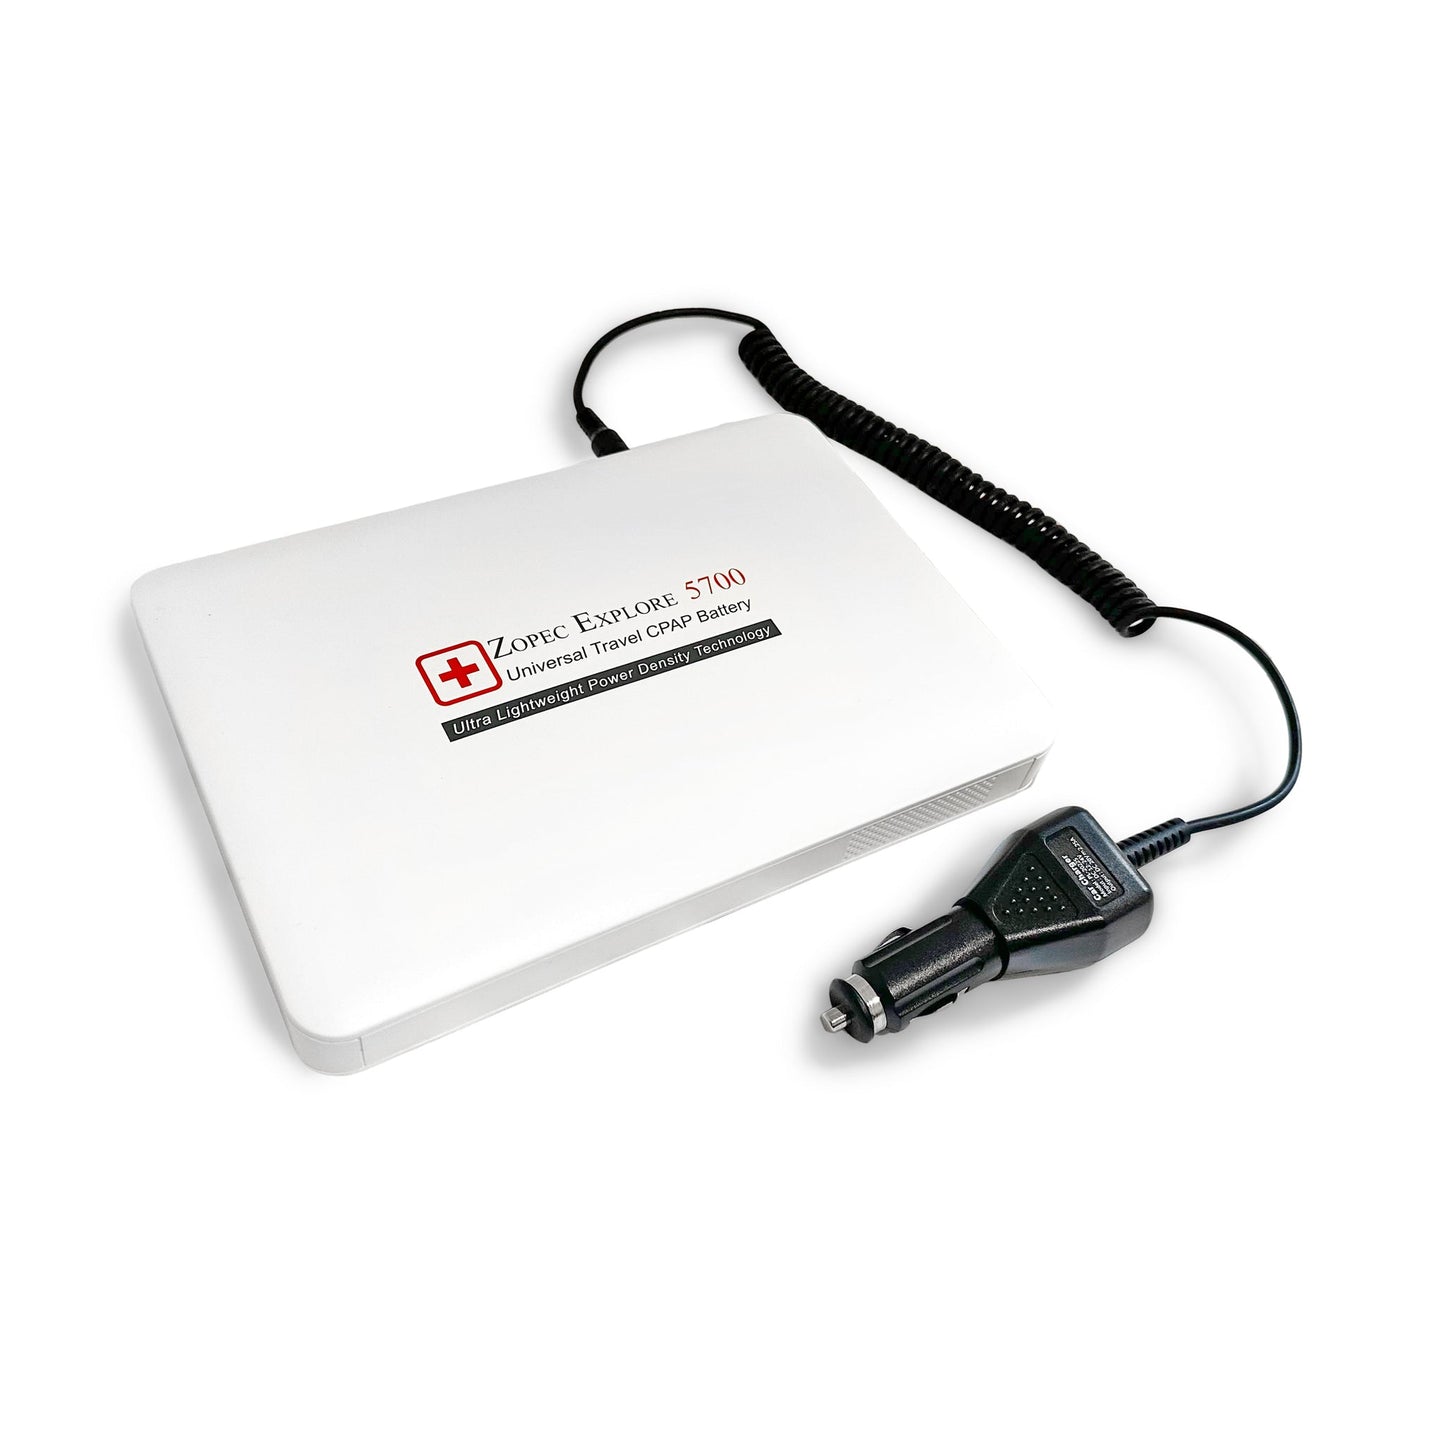 EXPLORE 5700 CPAP/BiPap Travel Battery (up to 3 nights) - Only 2.5 lb and 1" Thin